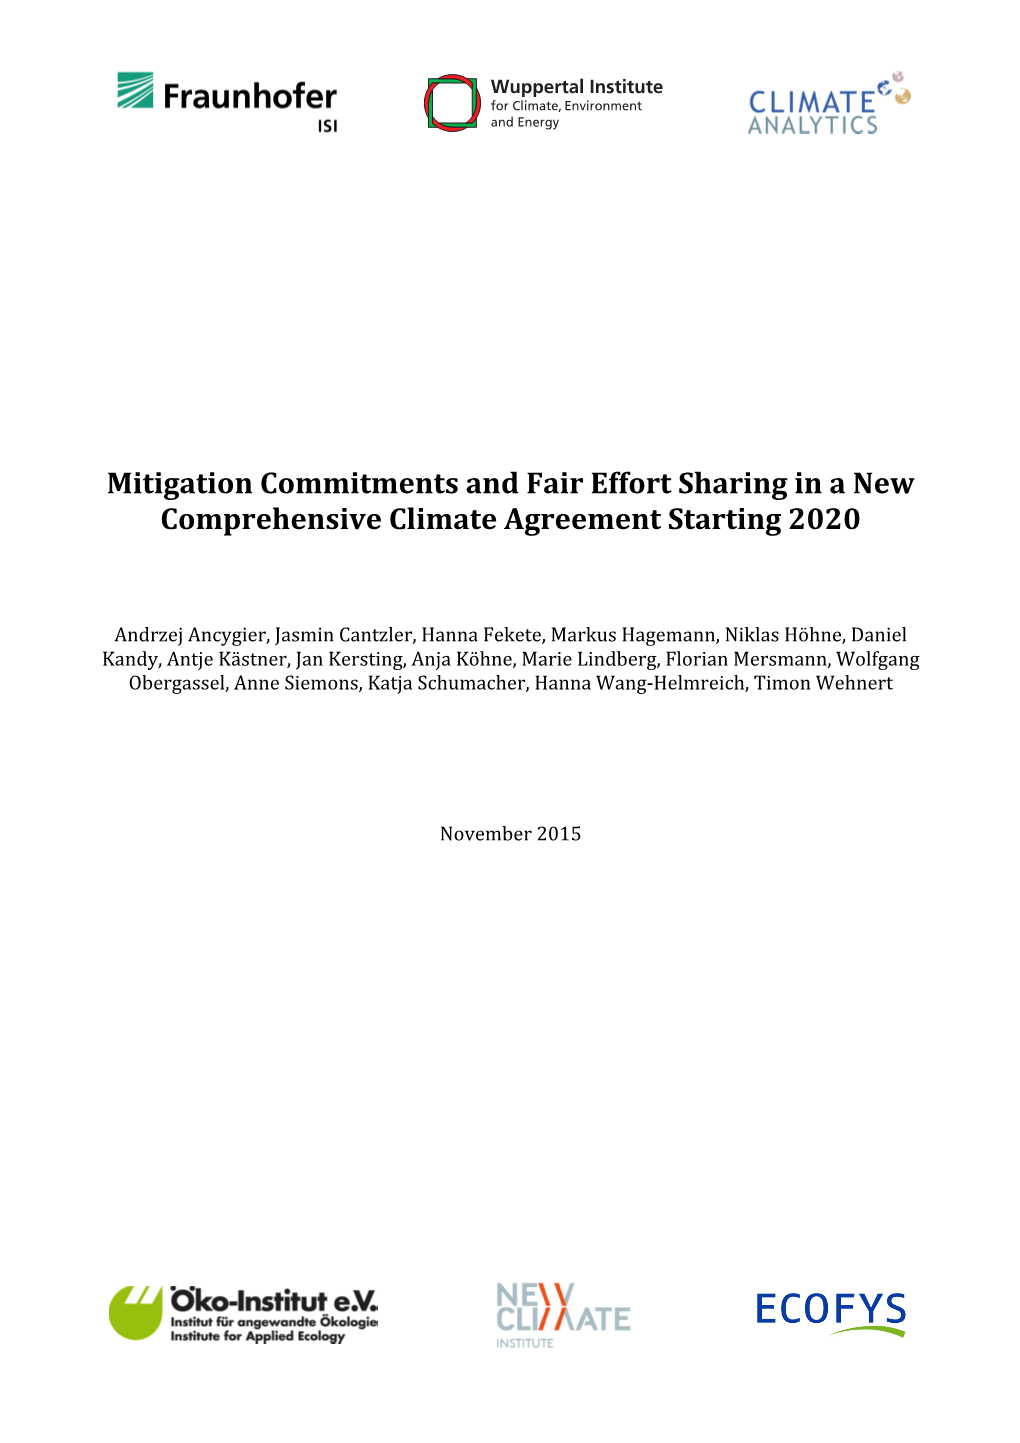 Mitigation Commitments and Fair Effort Sharing in a New Comprehensive Climate Agreement Starting 2020